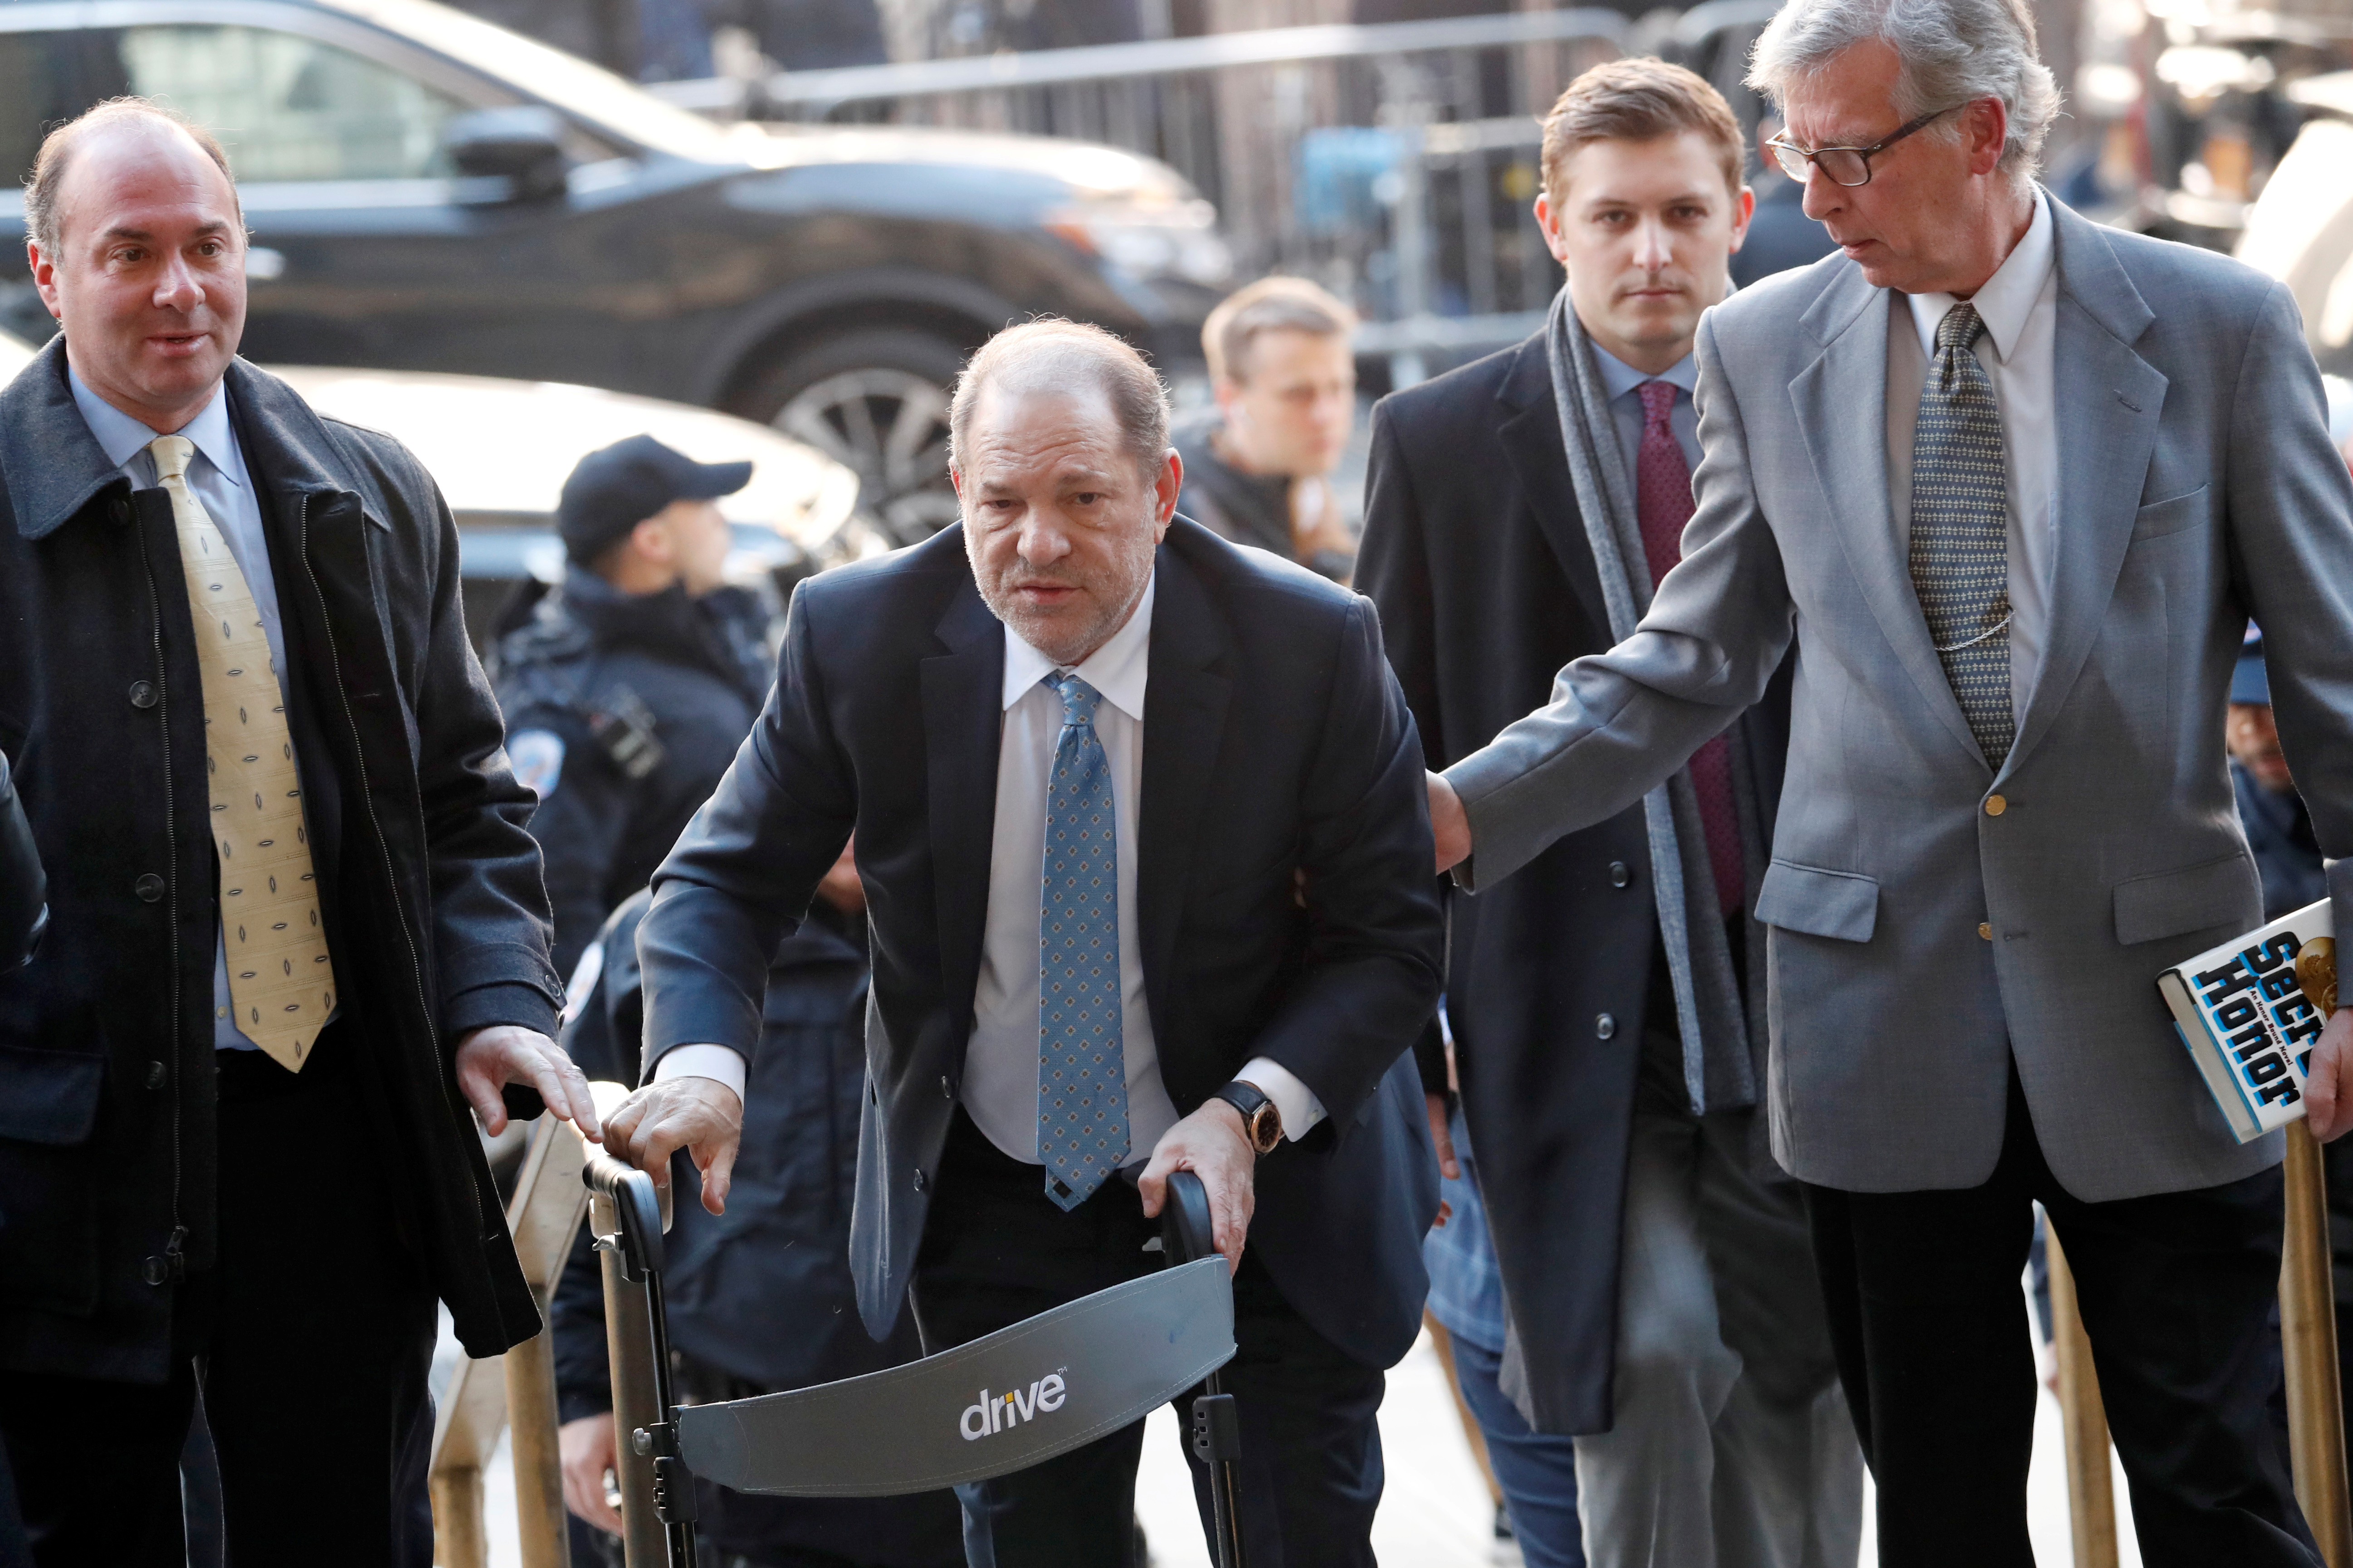 Harvey Weinstein arrives at New York Criminal Court for another day of jury deliberations in his sexual assault trial in the Manhattan borough of New York City